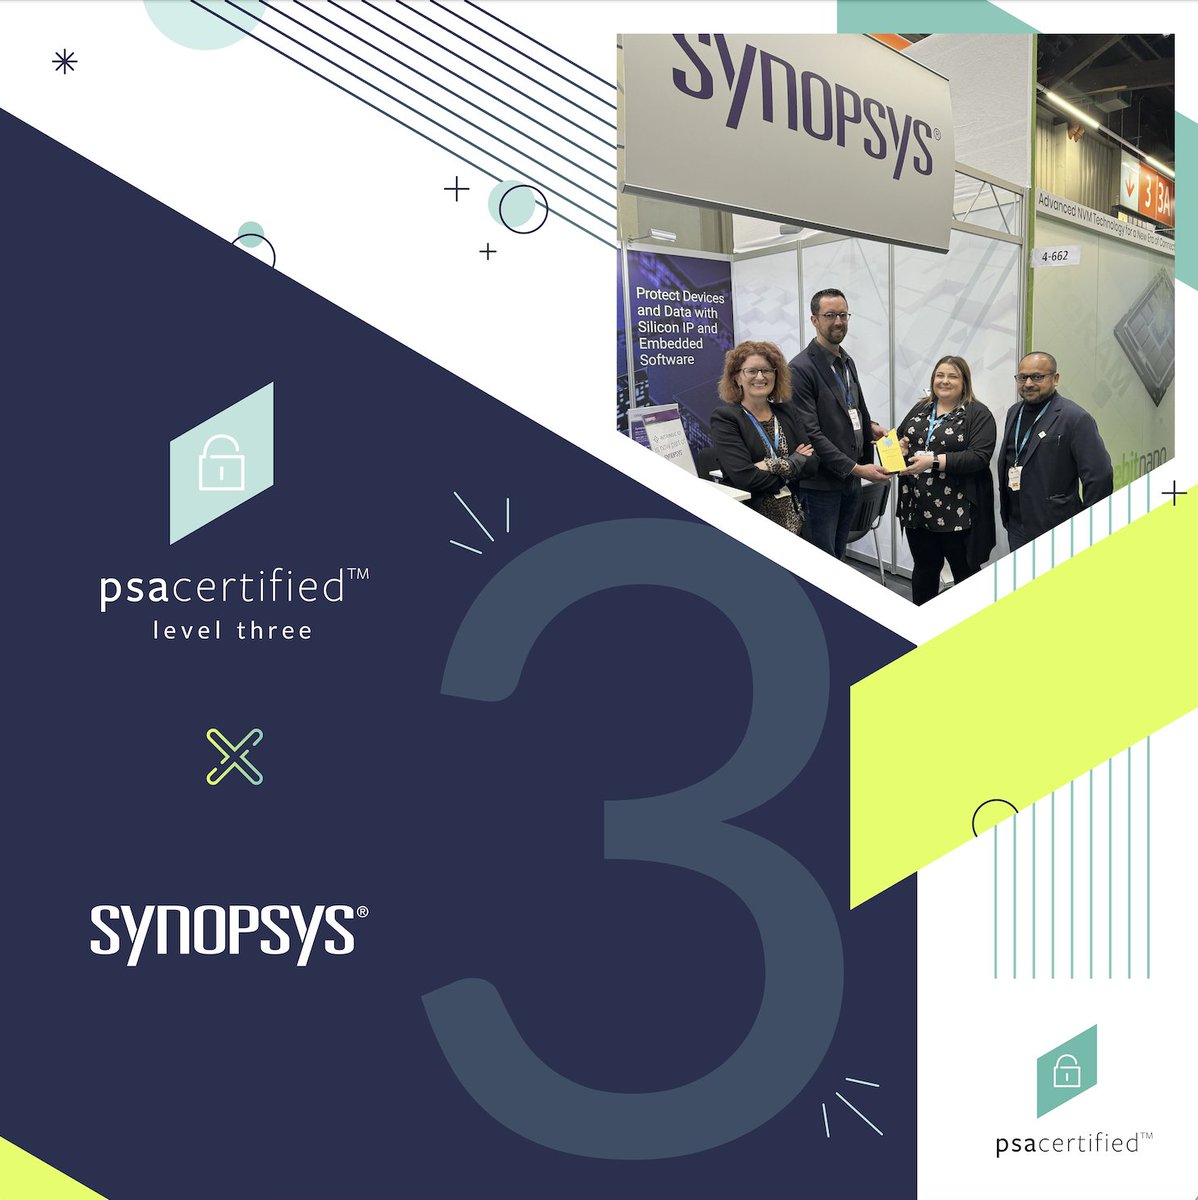 We are thrilled to present @IntrinsicID (newly acquired by @Synopsys) with the PSA Certified Level 3 trophy!🏆 Presented by Stephanie Smith and Anurag Gupta at #embeddedworld, this comes with our huge congratulations and thanks for their efforts.